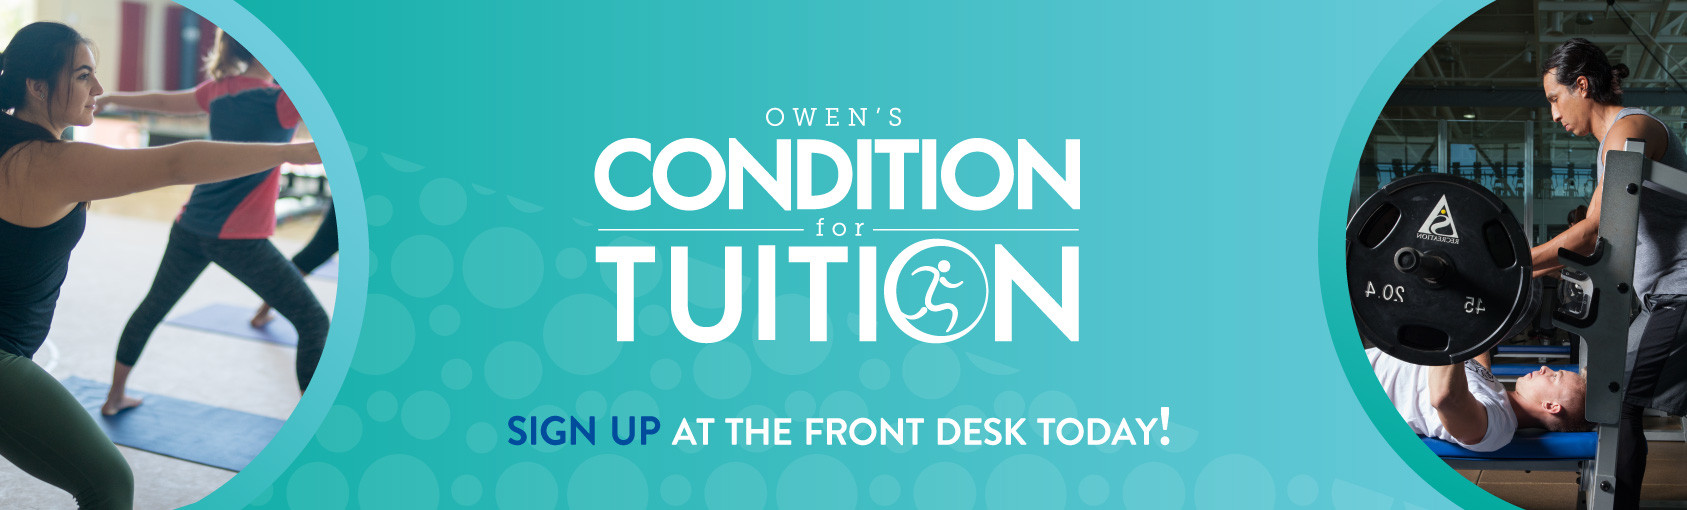 Sign-up for the Owen's Challenge Now Bannner